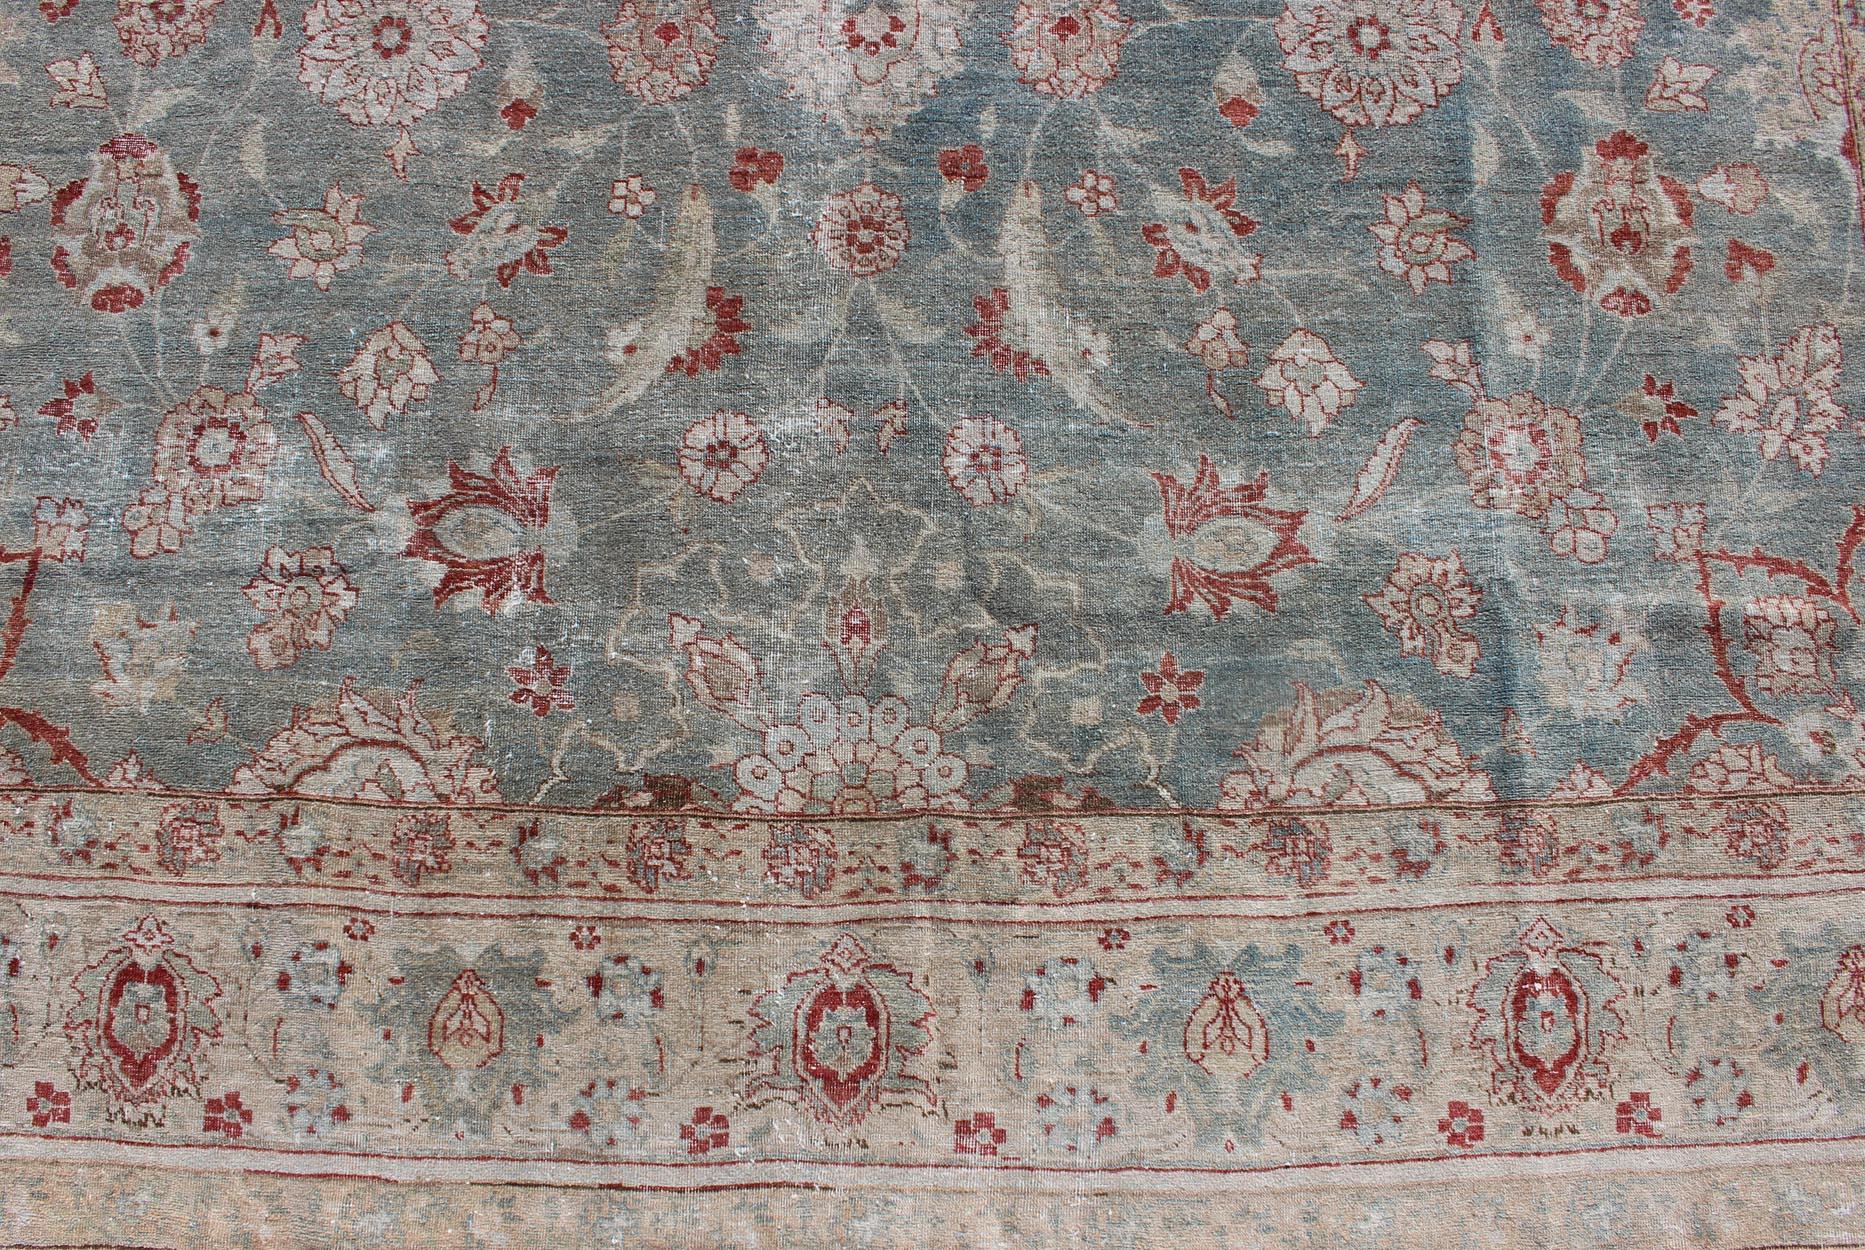 Antique Persian Tabriz Rug with Floral Medallion Design in Red and Blue In Good Condition For Sale In Atlanta, GA